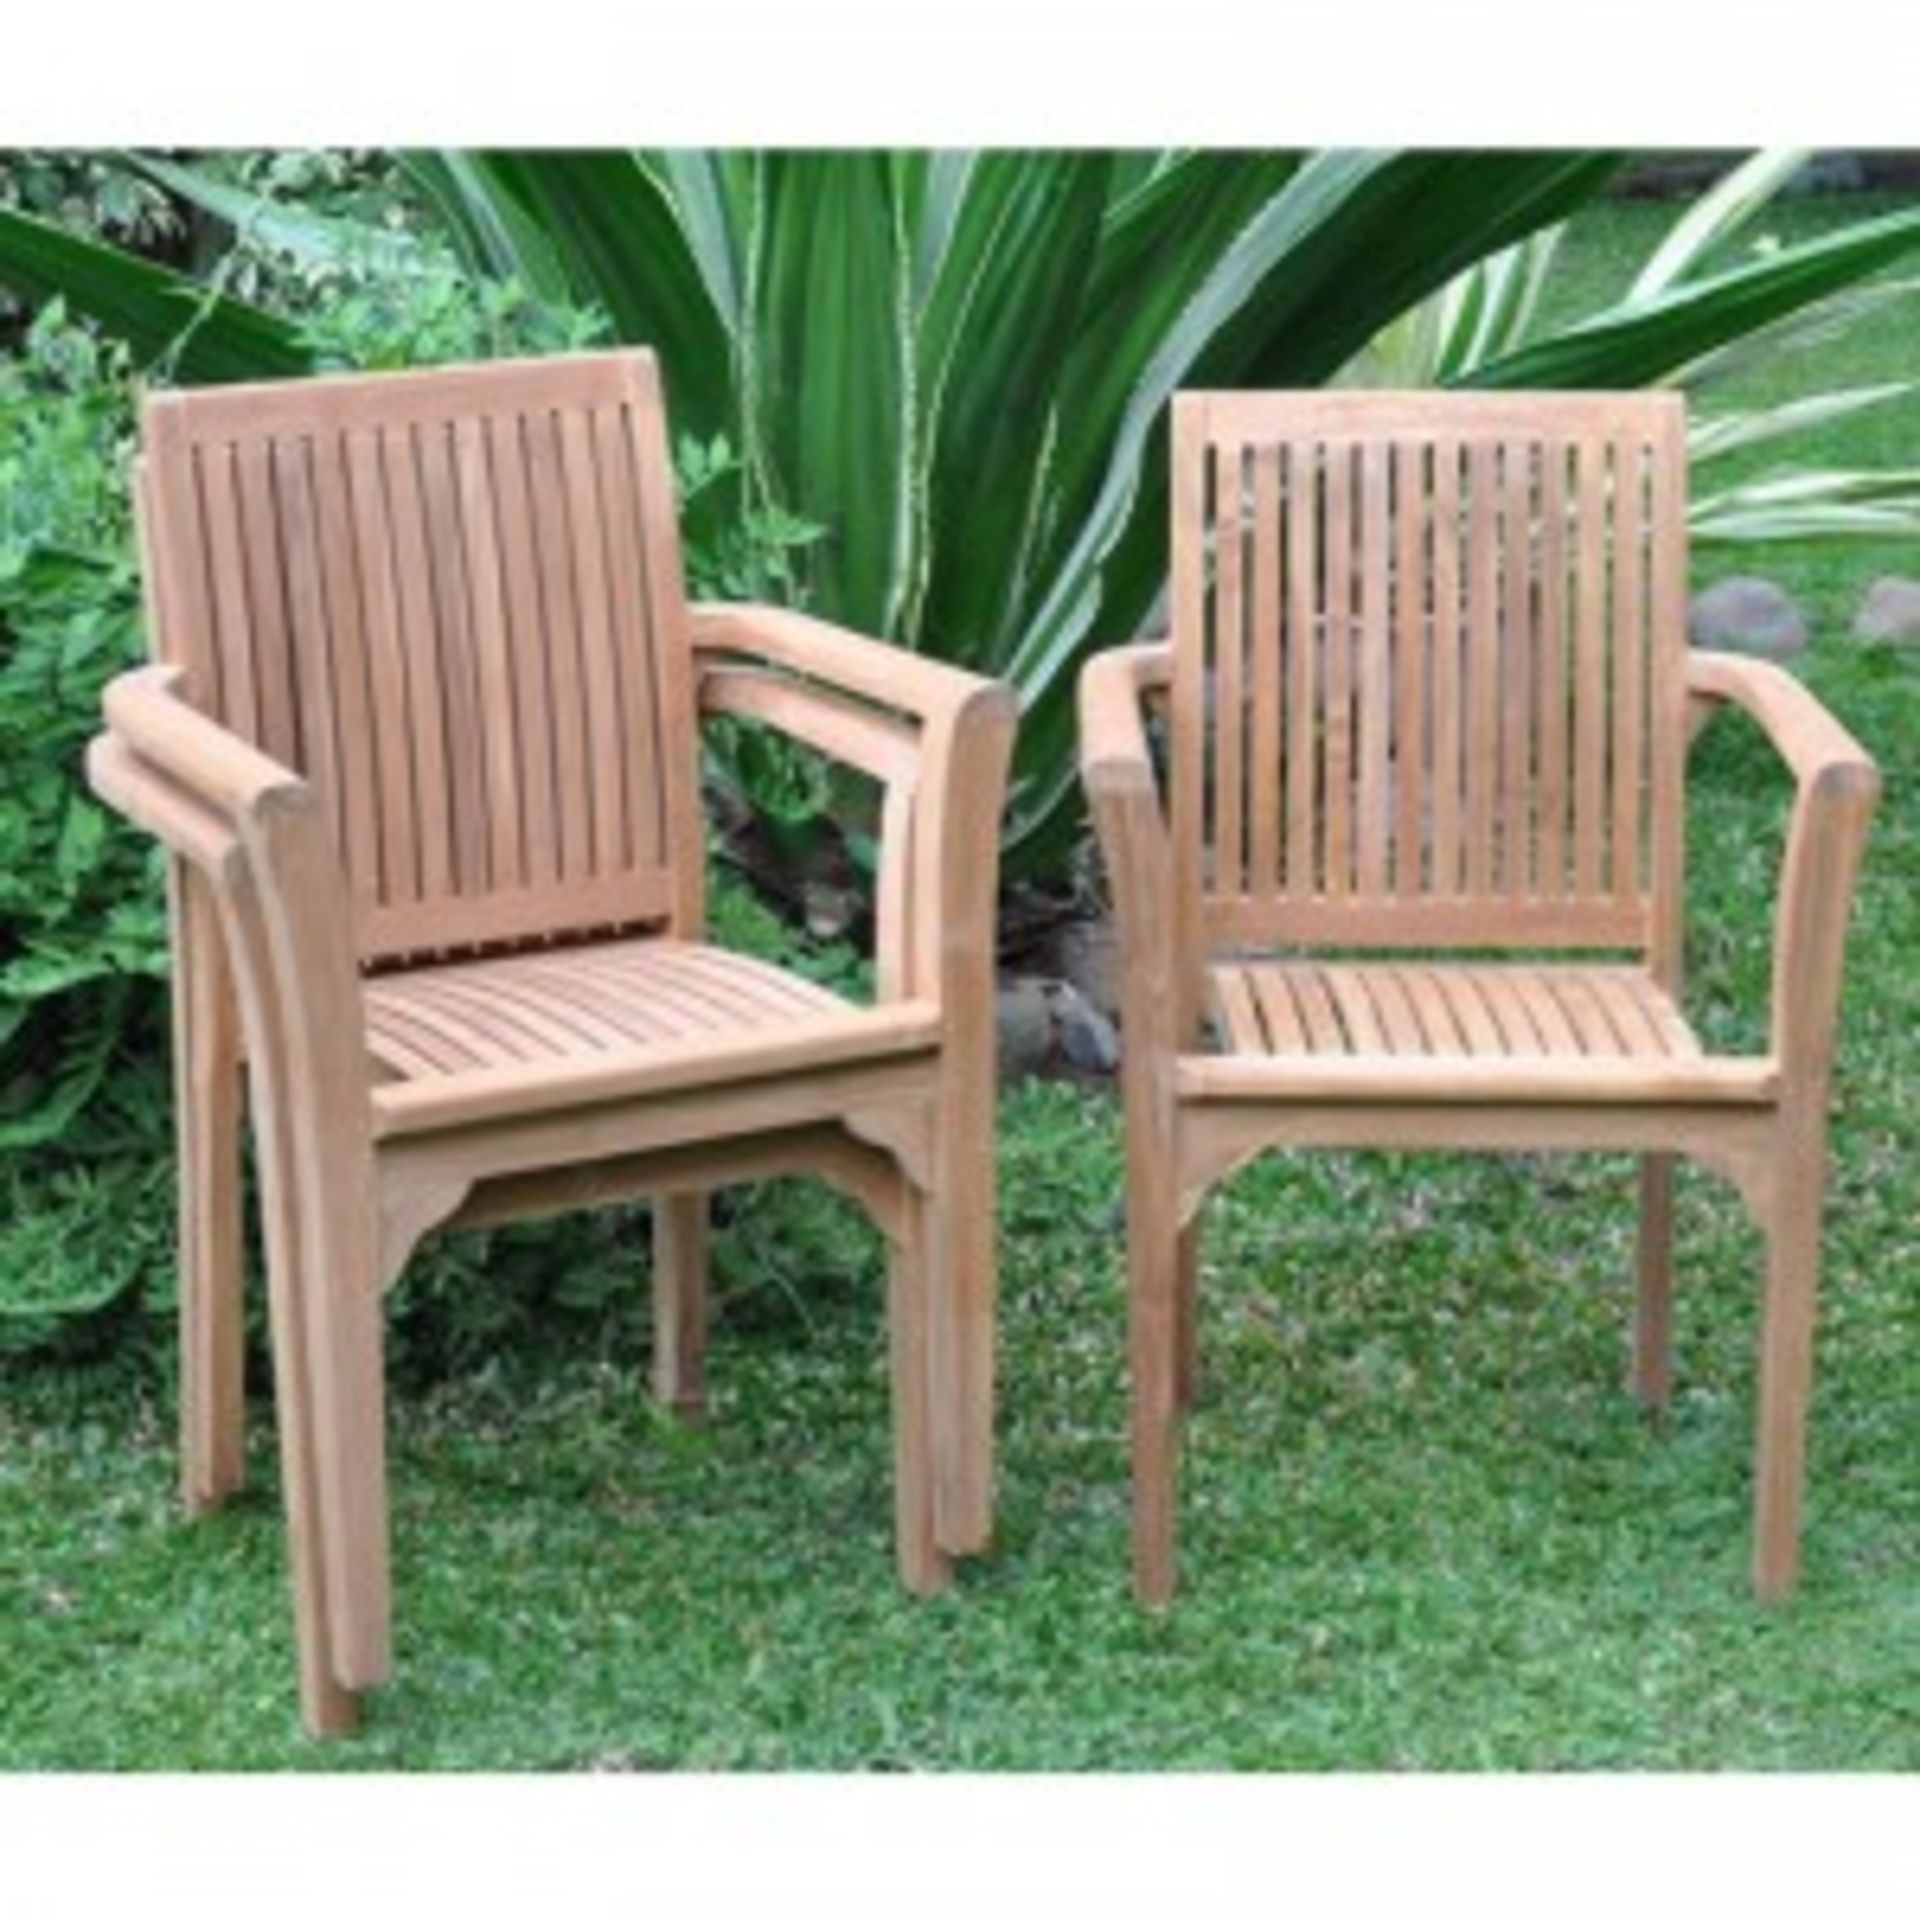 V Brand New TEAK STACKING CHAIR - Made From Grade A Plantation Teak/ RRP £199/ NOTE: Item Is